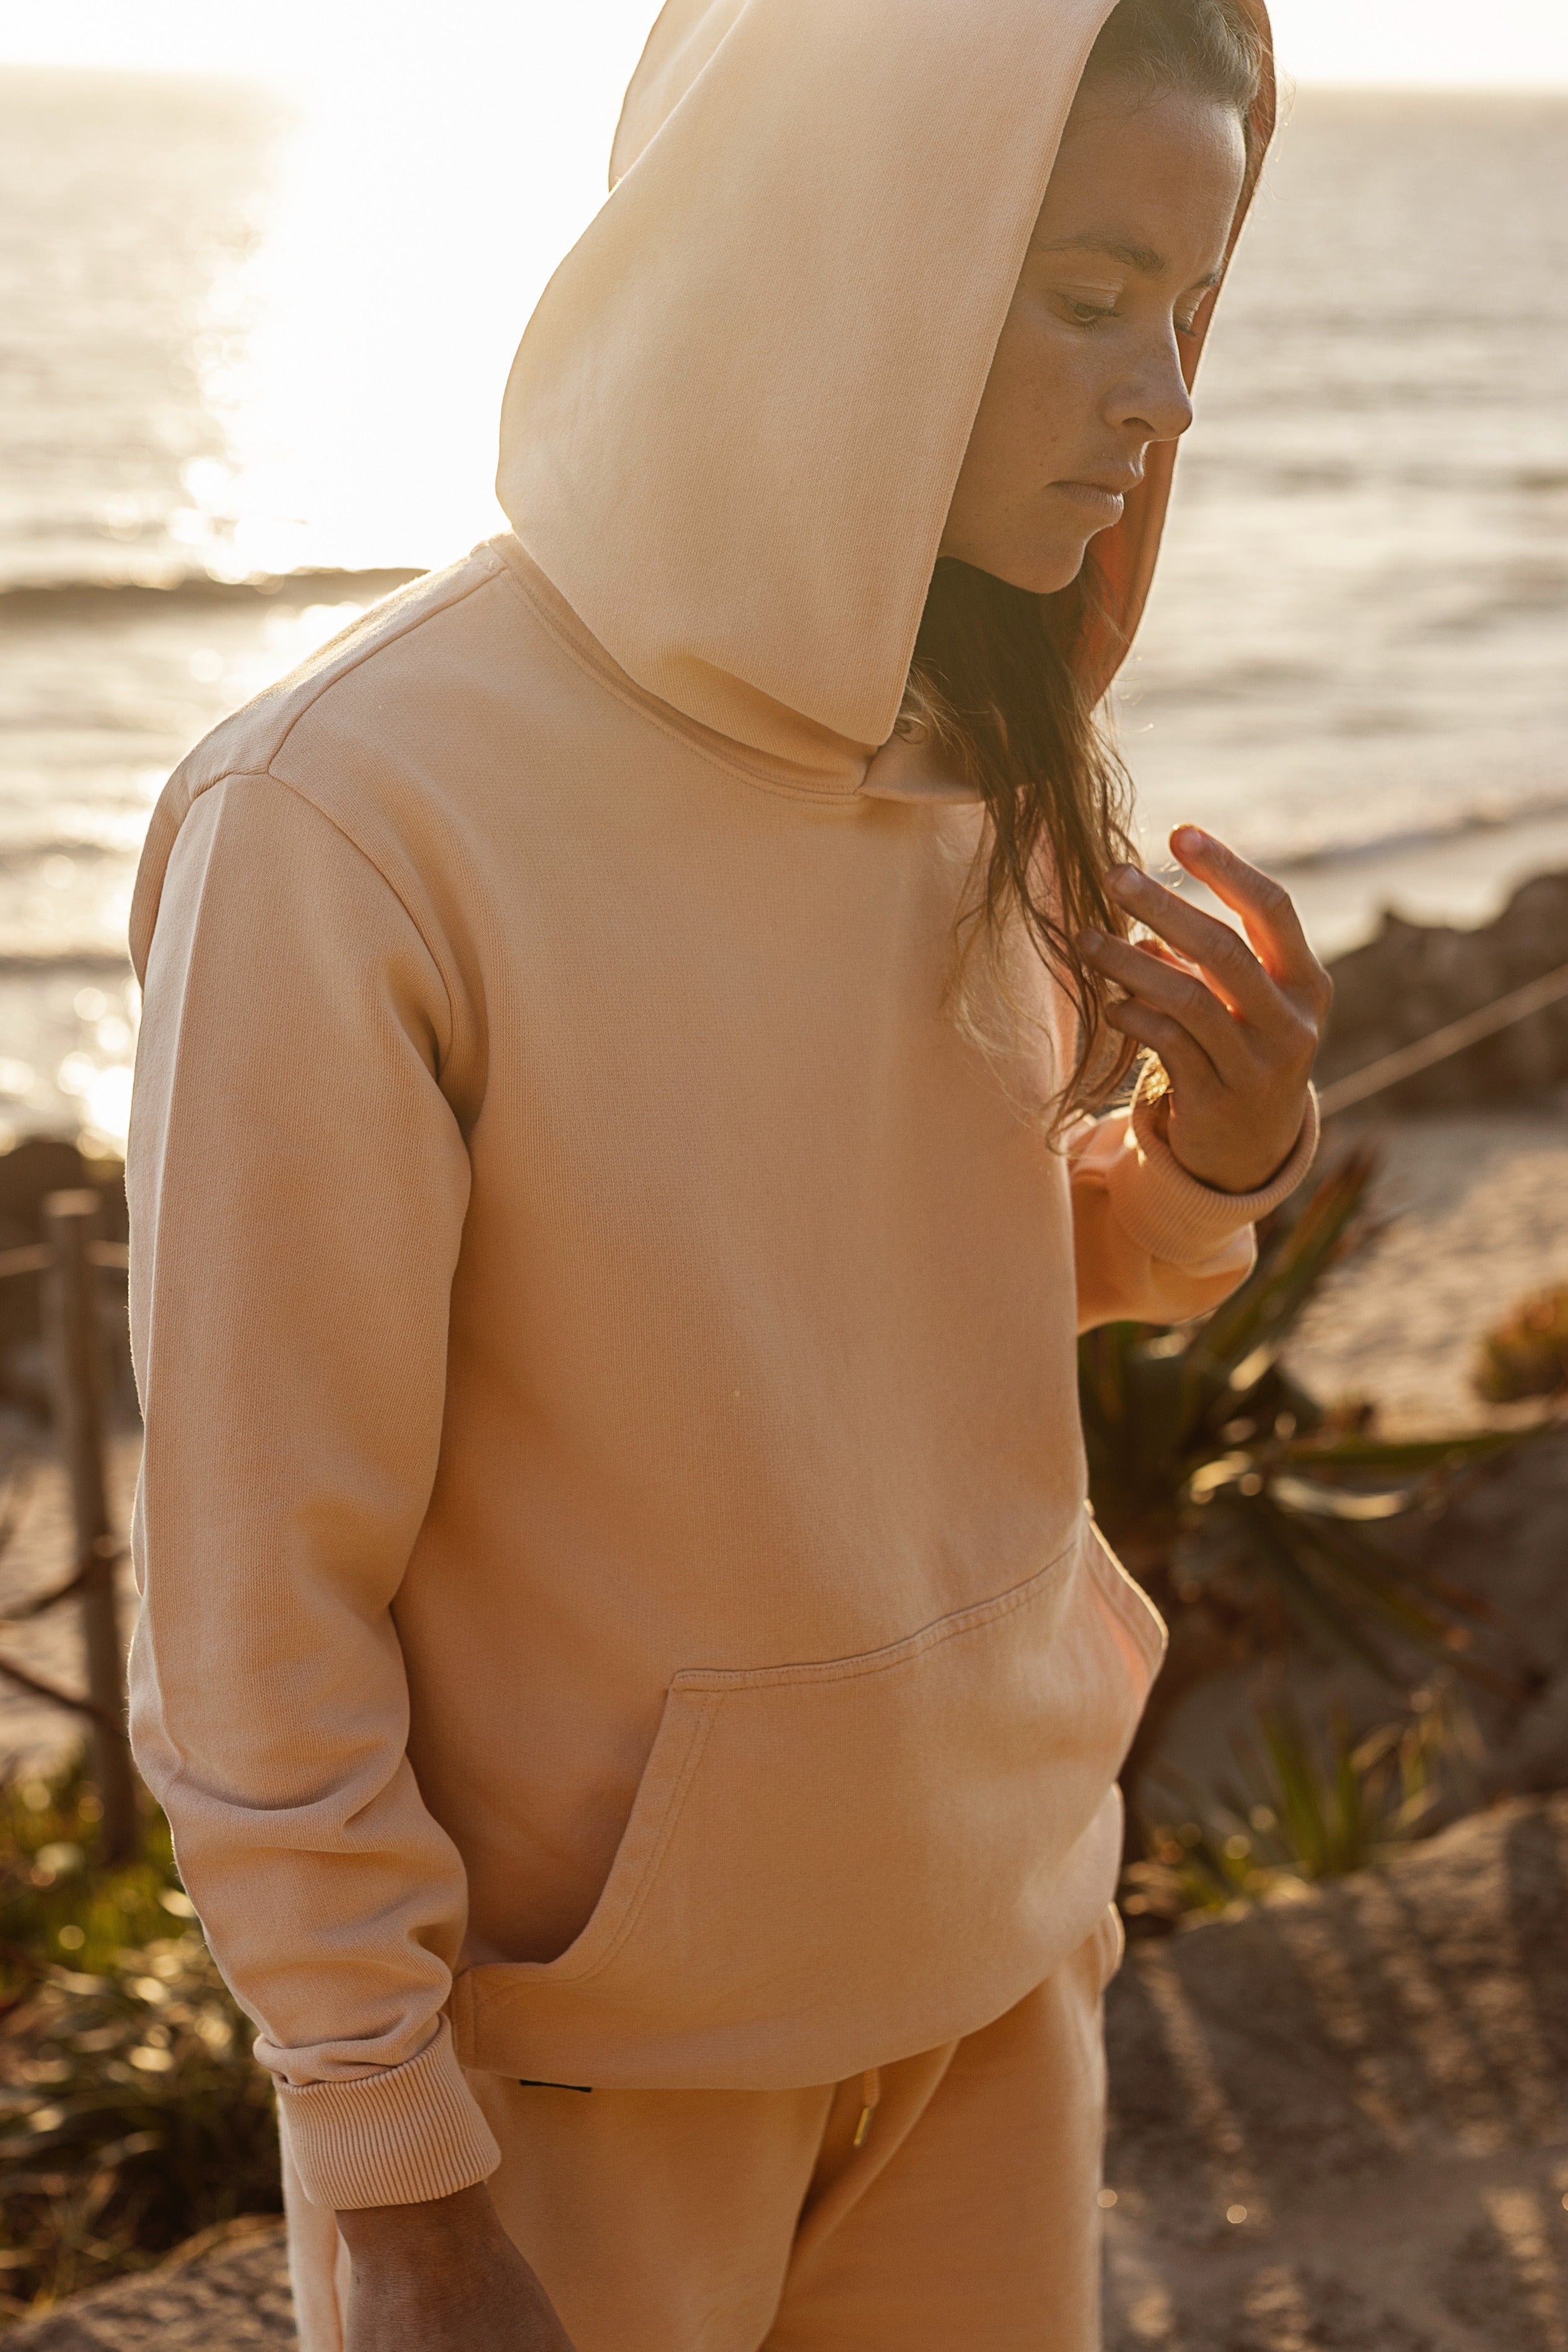 Peach-colored hoodie Premium Peached made from 100% organic cotton from DIRTS